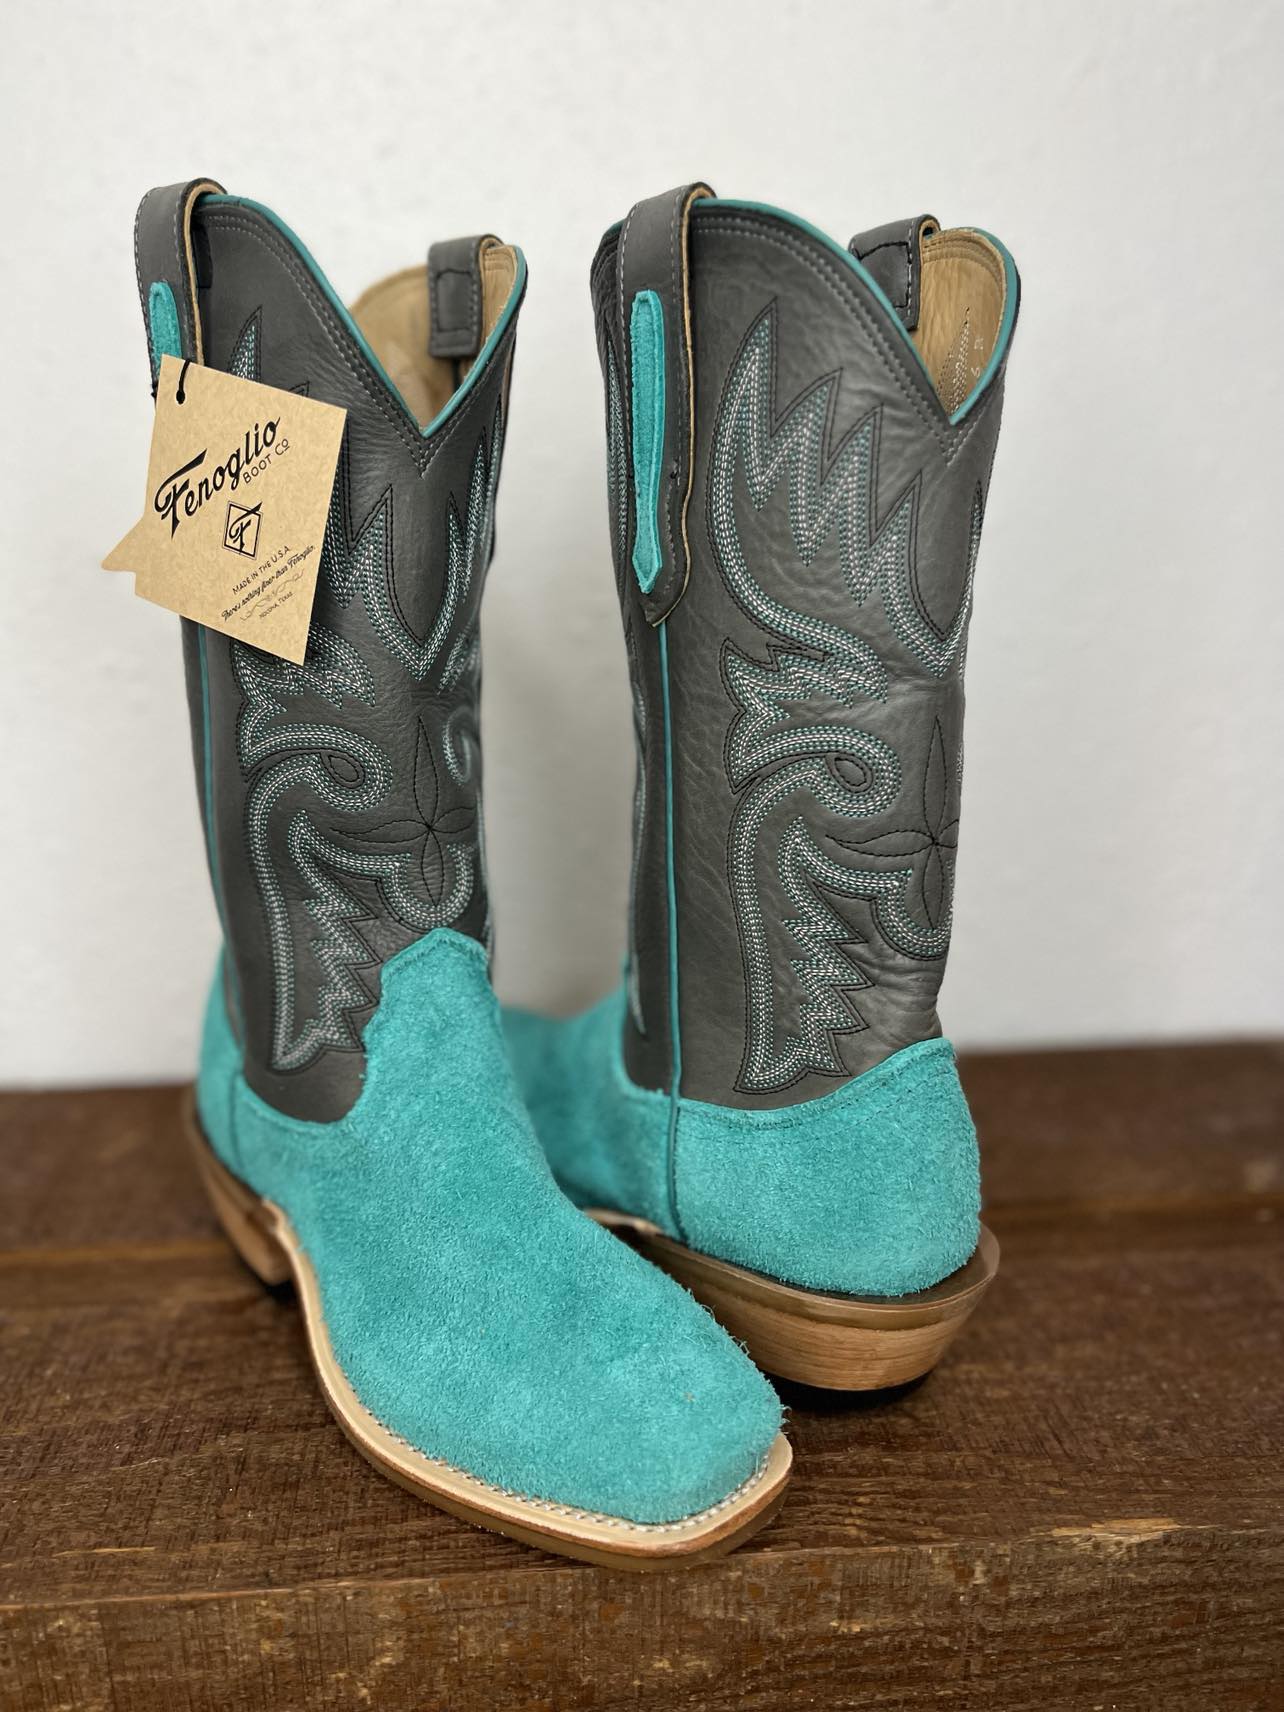 Women's Fenoglio Turquoise Moto Roughout W/ Space Grey Boots-Women's Boots-Fenoglio Boots-Lucky J Boots & More, Women's, Men's, & Kids Western Store Located in Carthage, MO